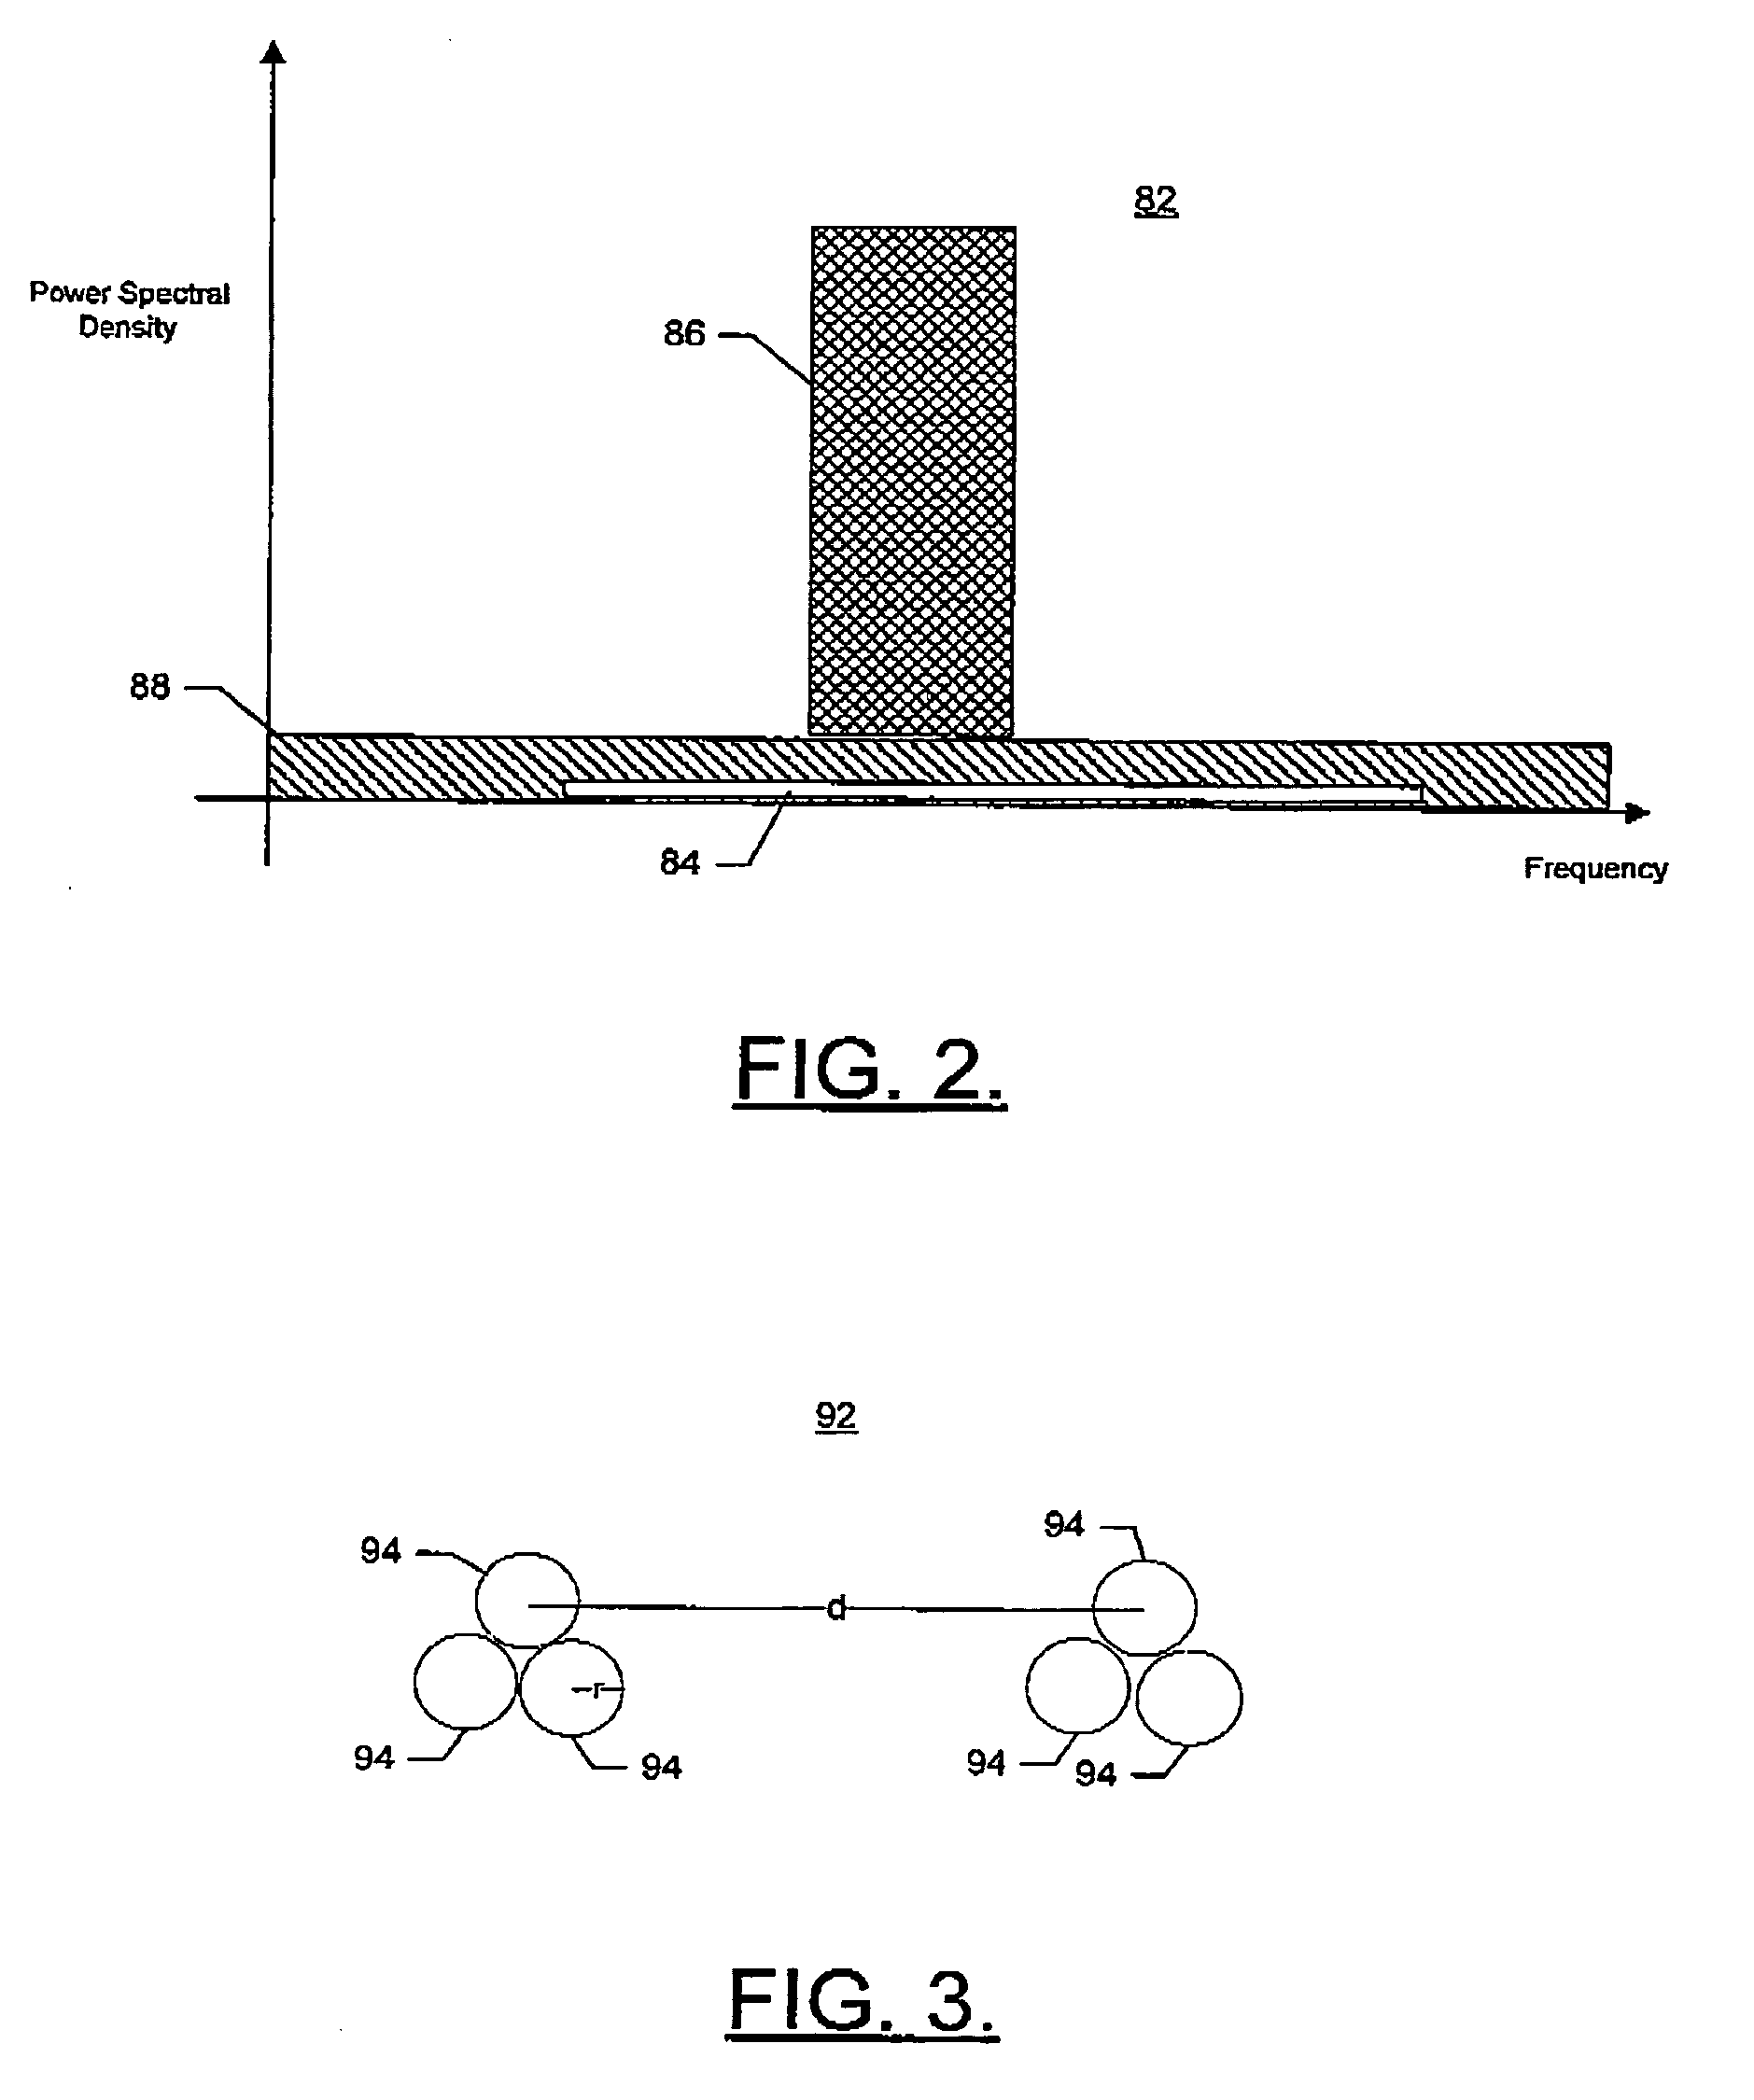 Apparatus, and associated method, for facilitating communications in a radio communication system through use of ultrawide band signals